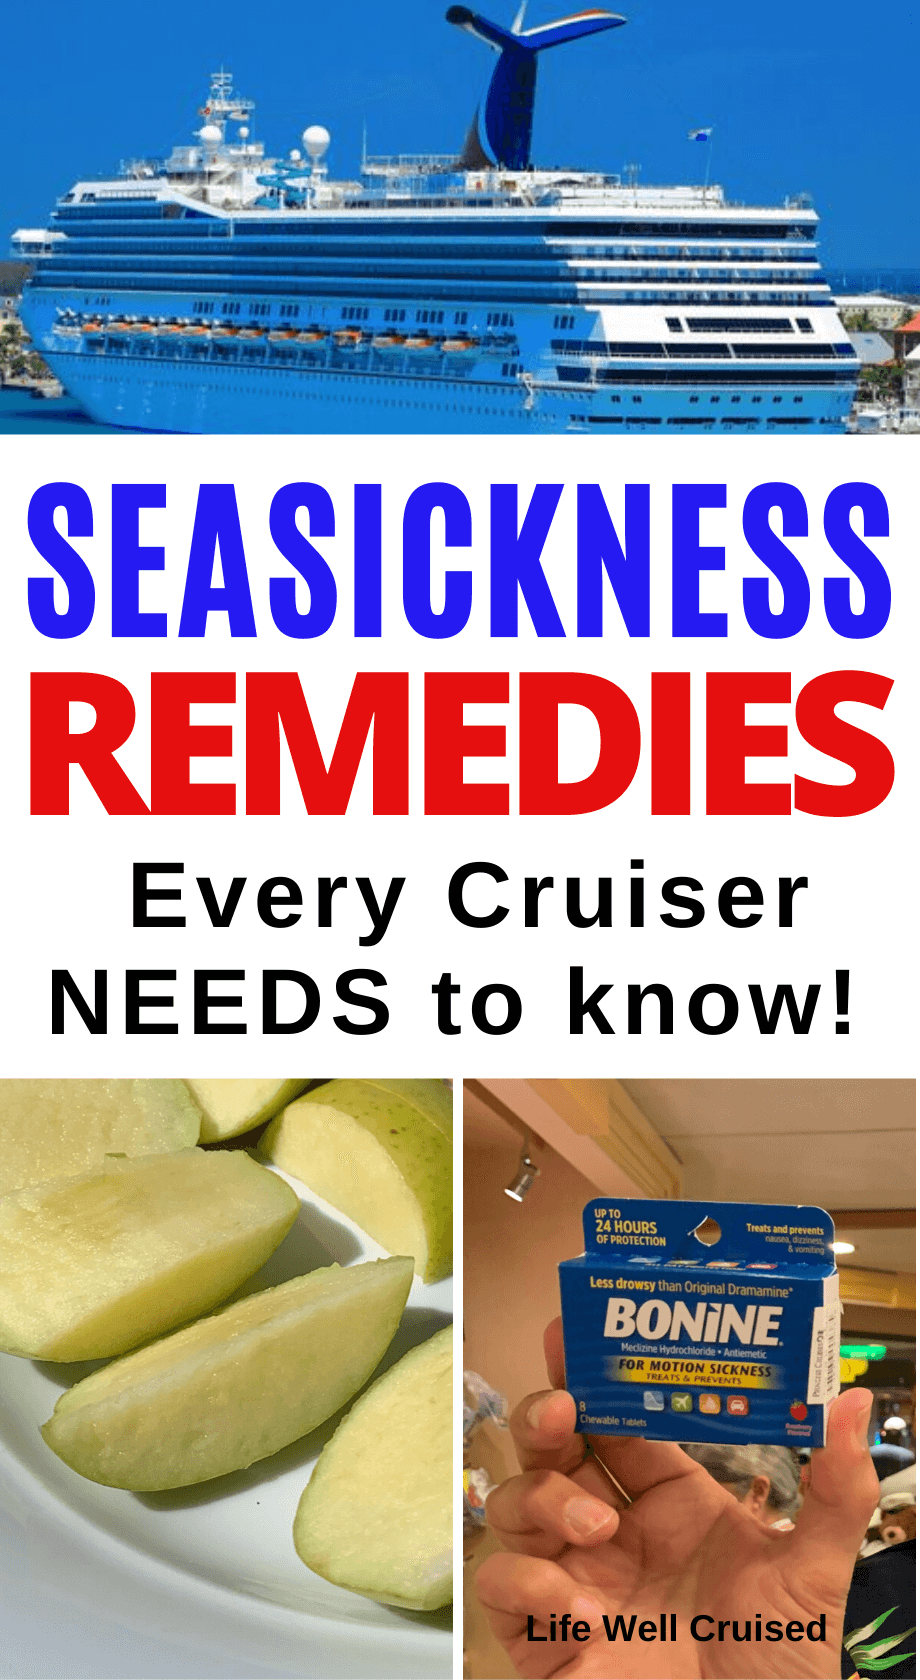 cure for seasickness on cruise